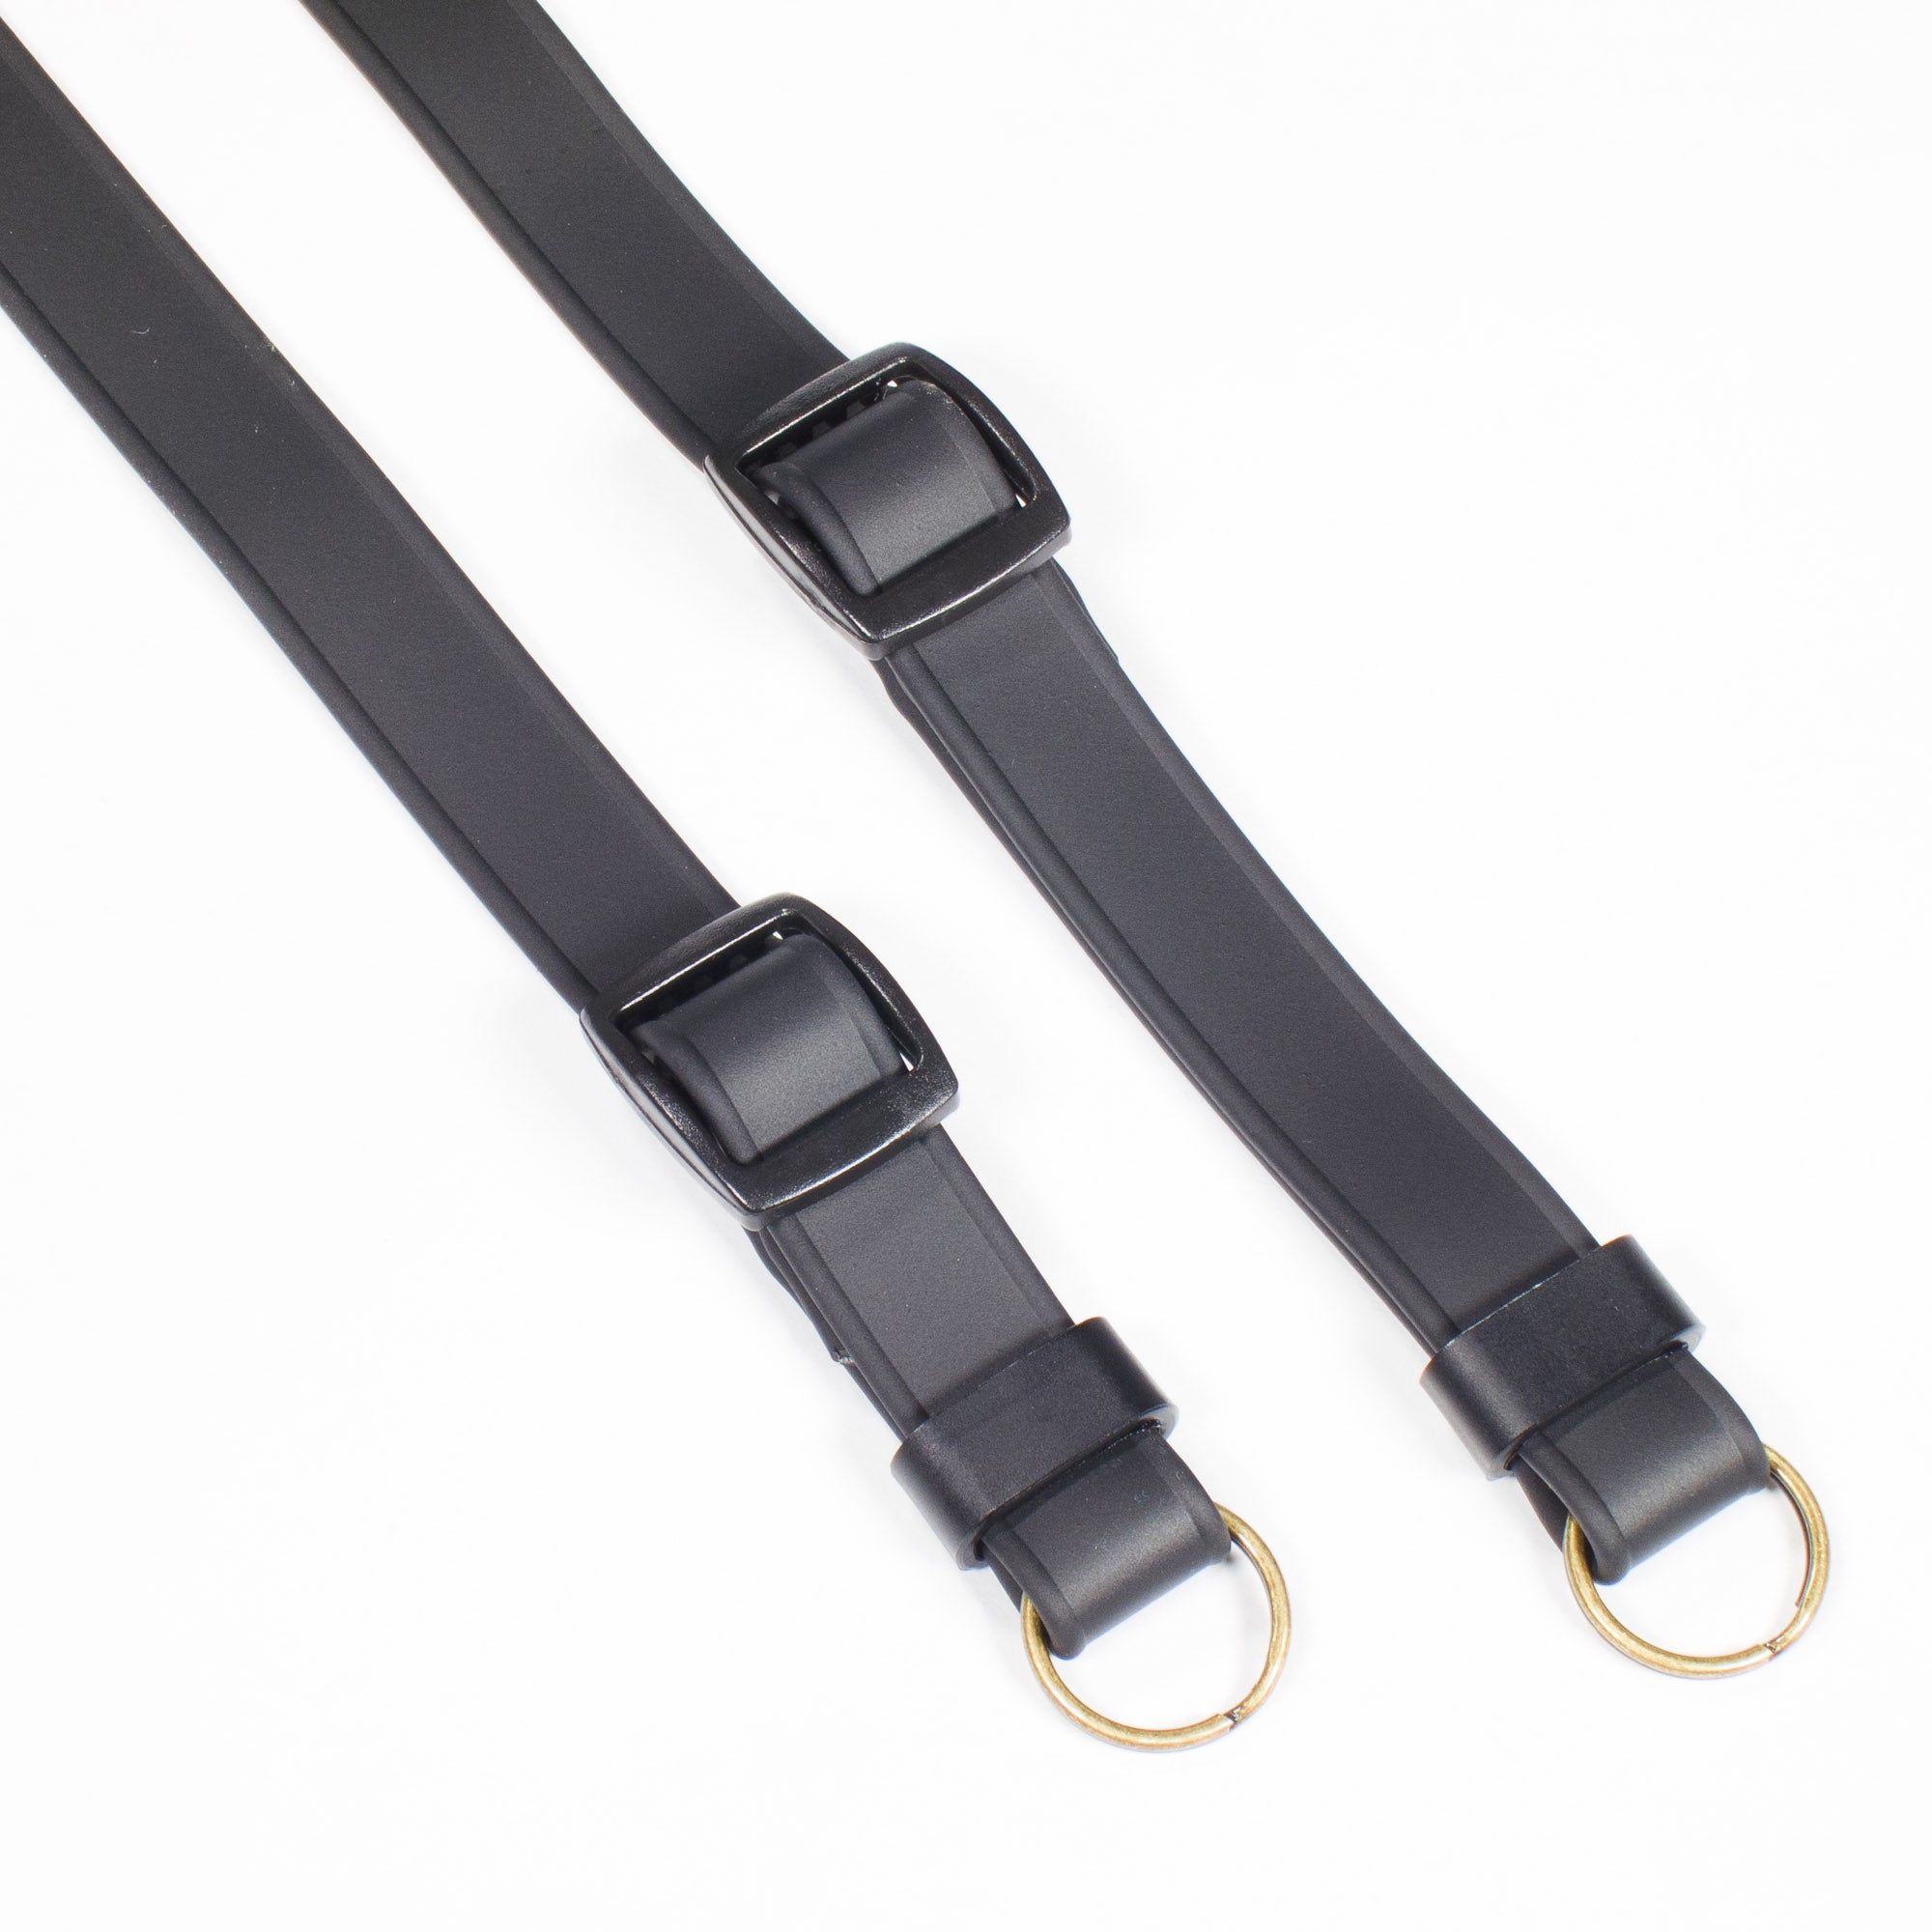 Camera Strap Adjustable, No Leather, Flexible, Super Strong